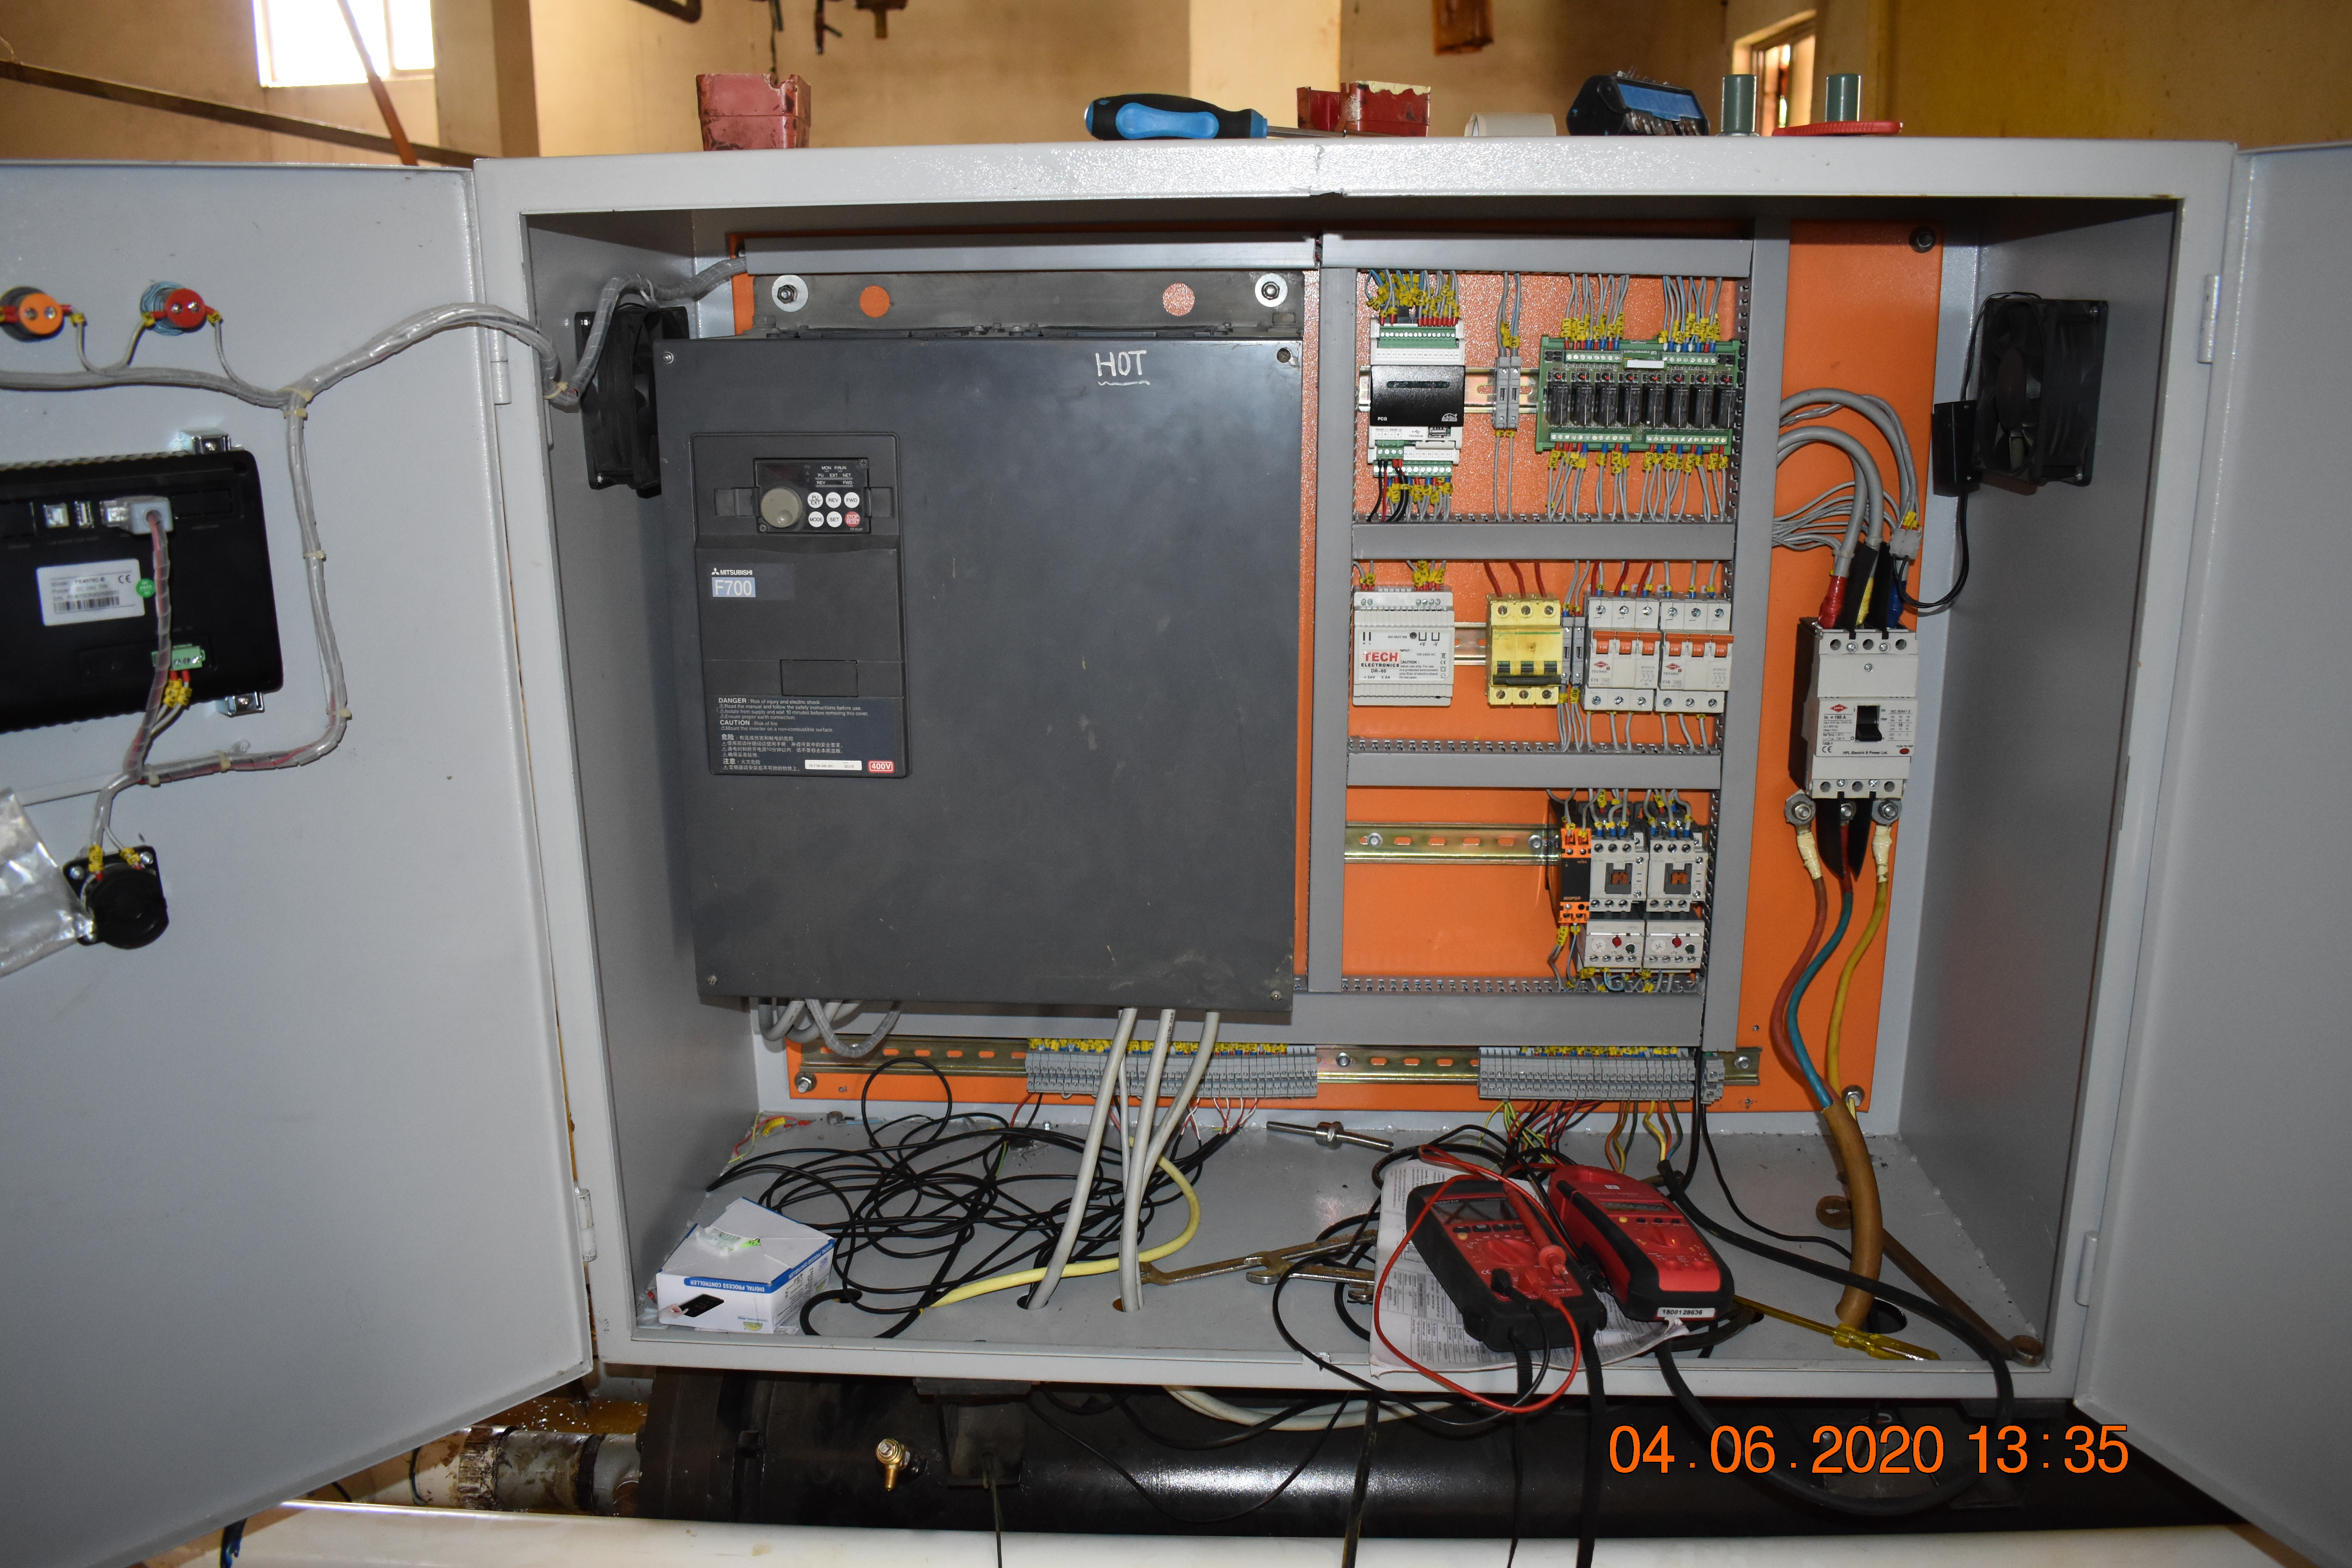 Panel Upgradation Modification In existing panel